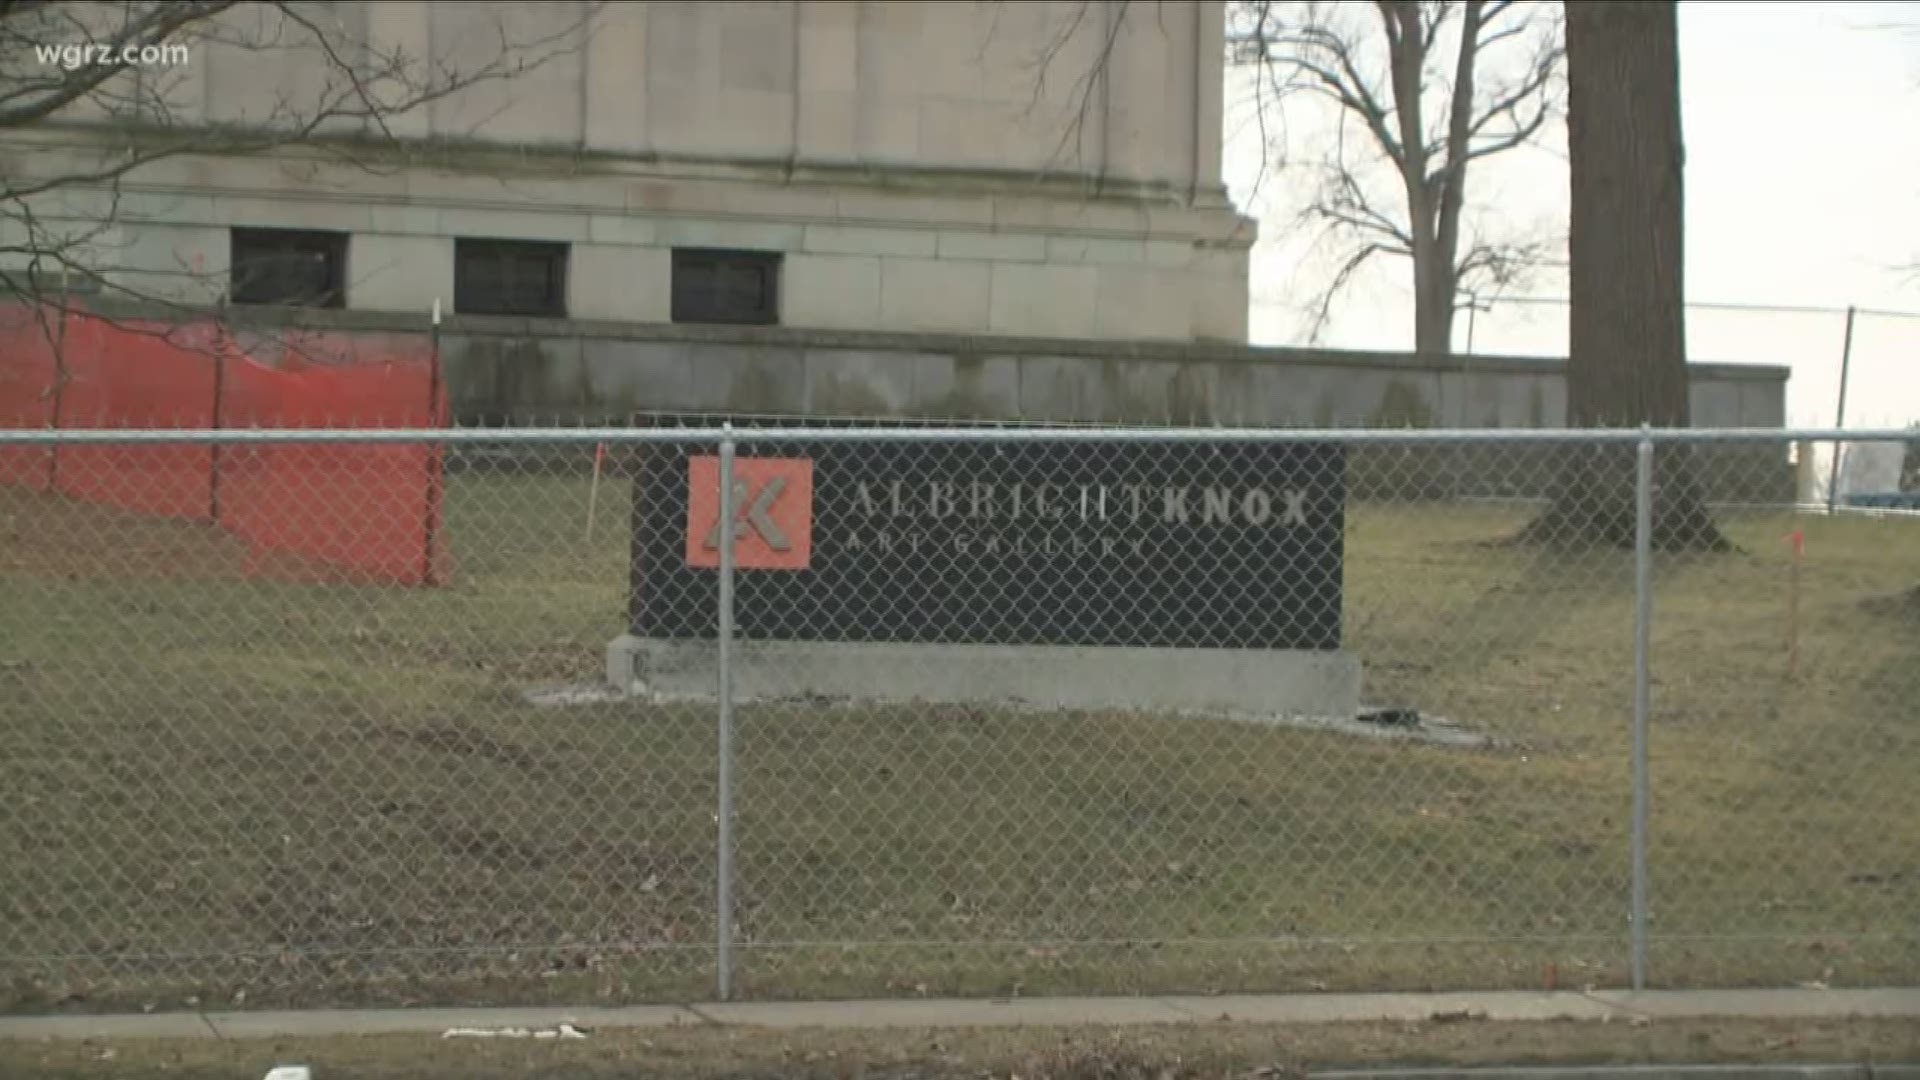 Albright Knox museum provides expansion update